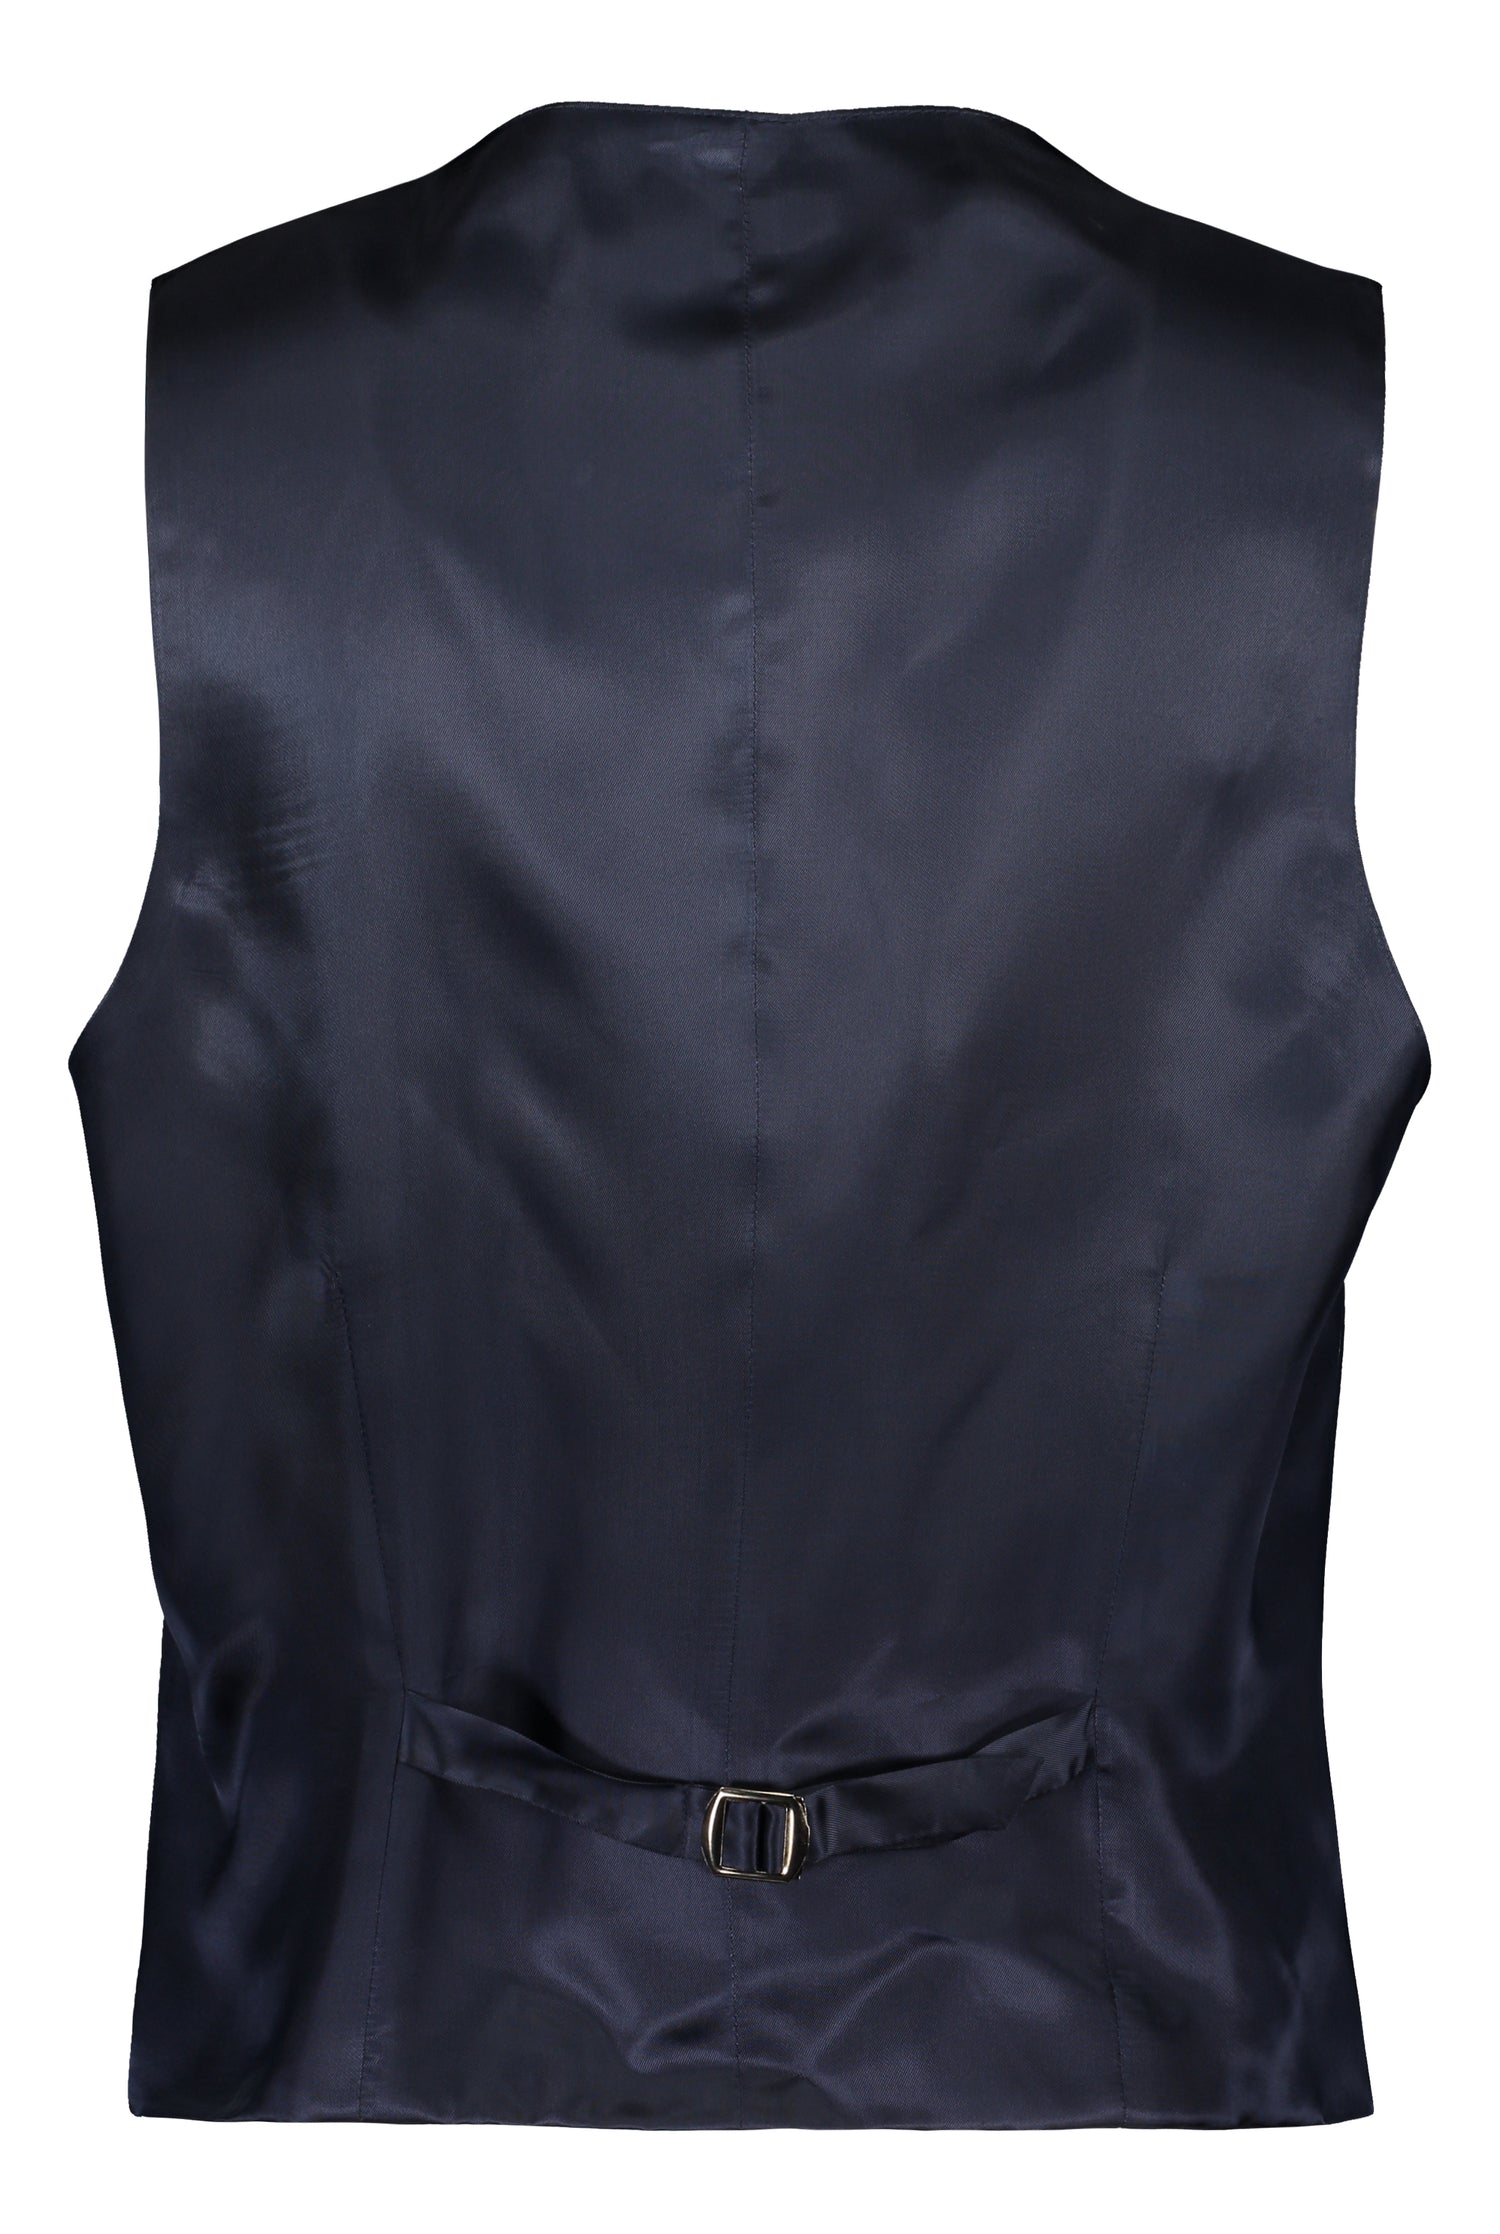 Blue Waistcoat for Modern Fit Suit (7948334629086)